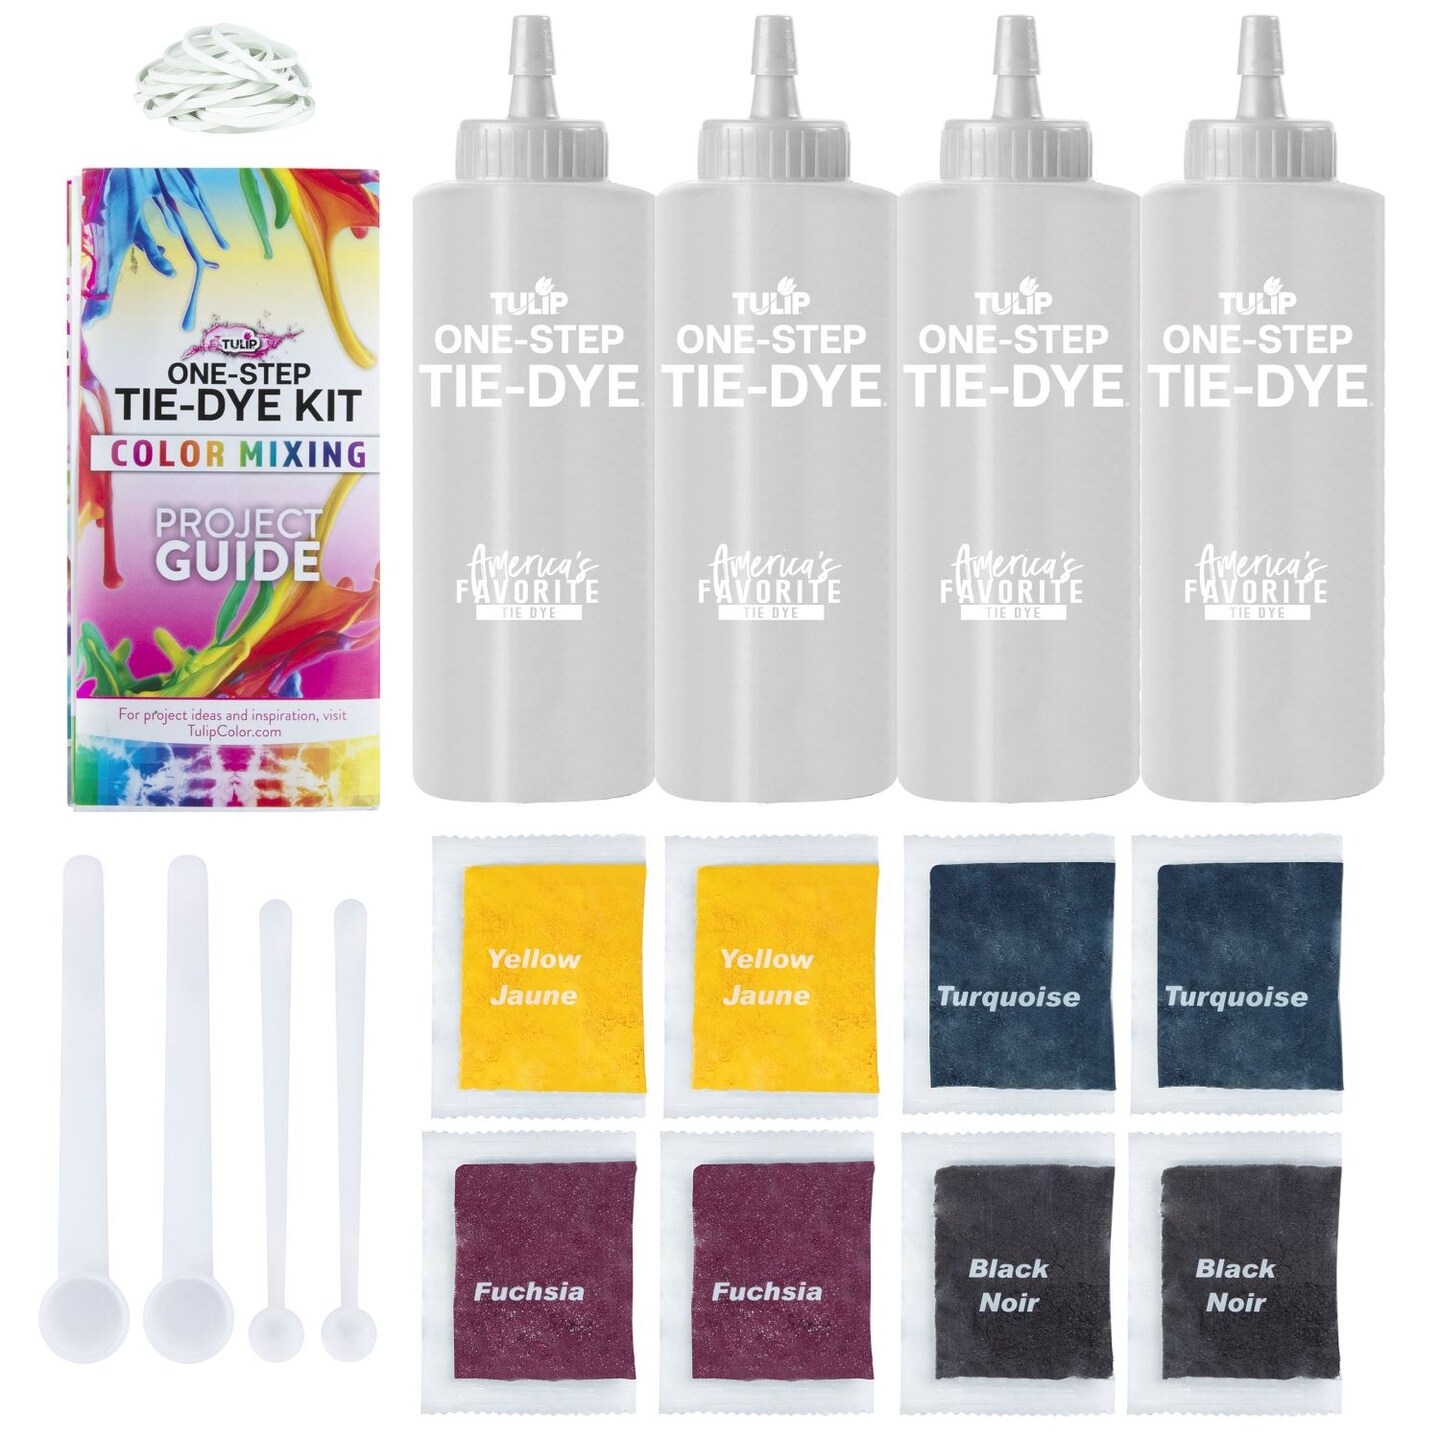 TULIP One-Step Tie-Dye Color Mixing Kit